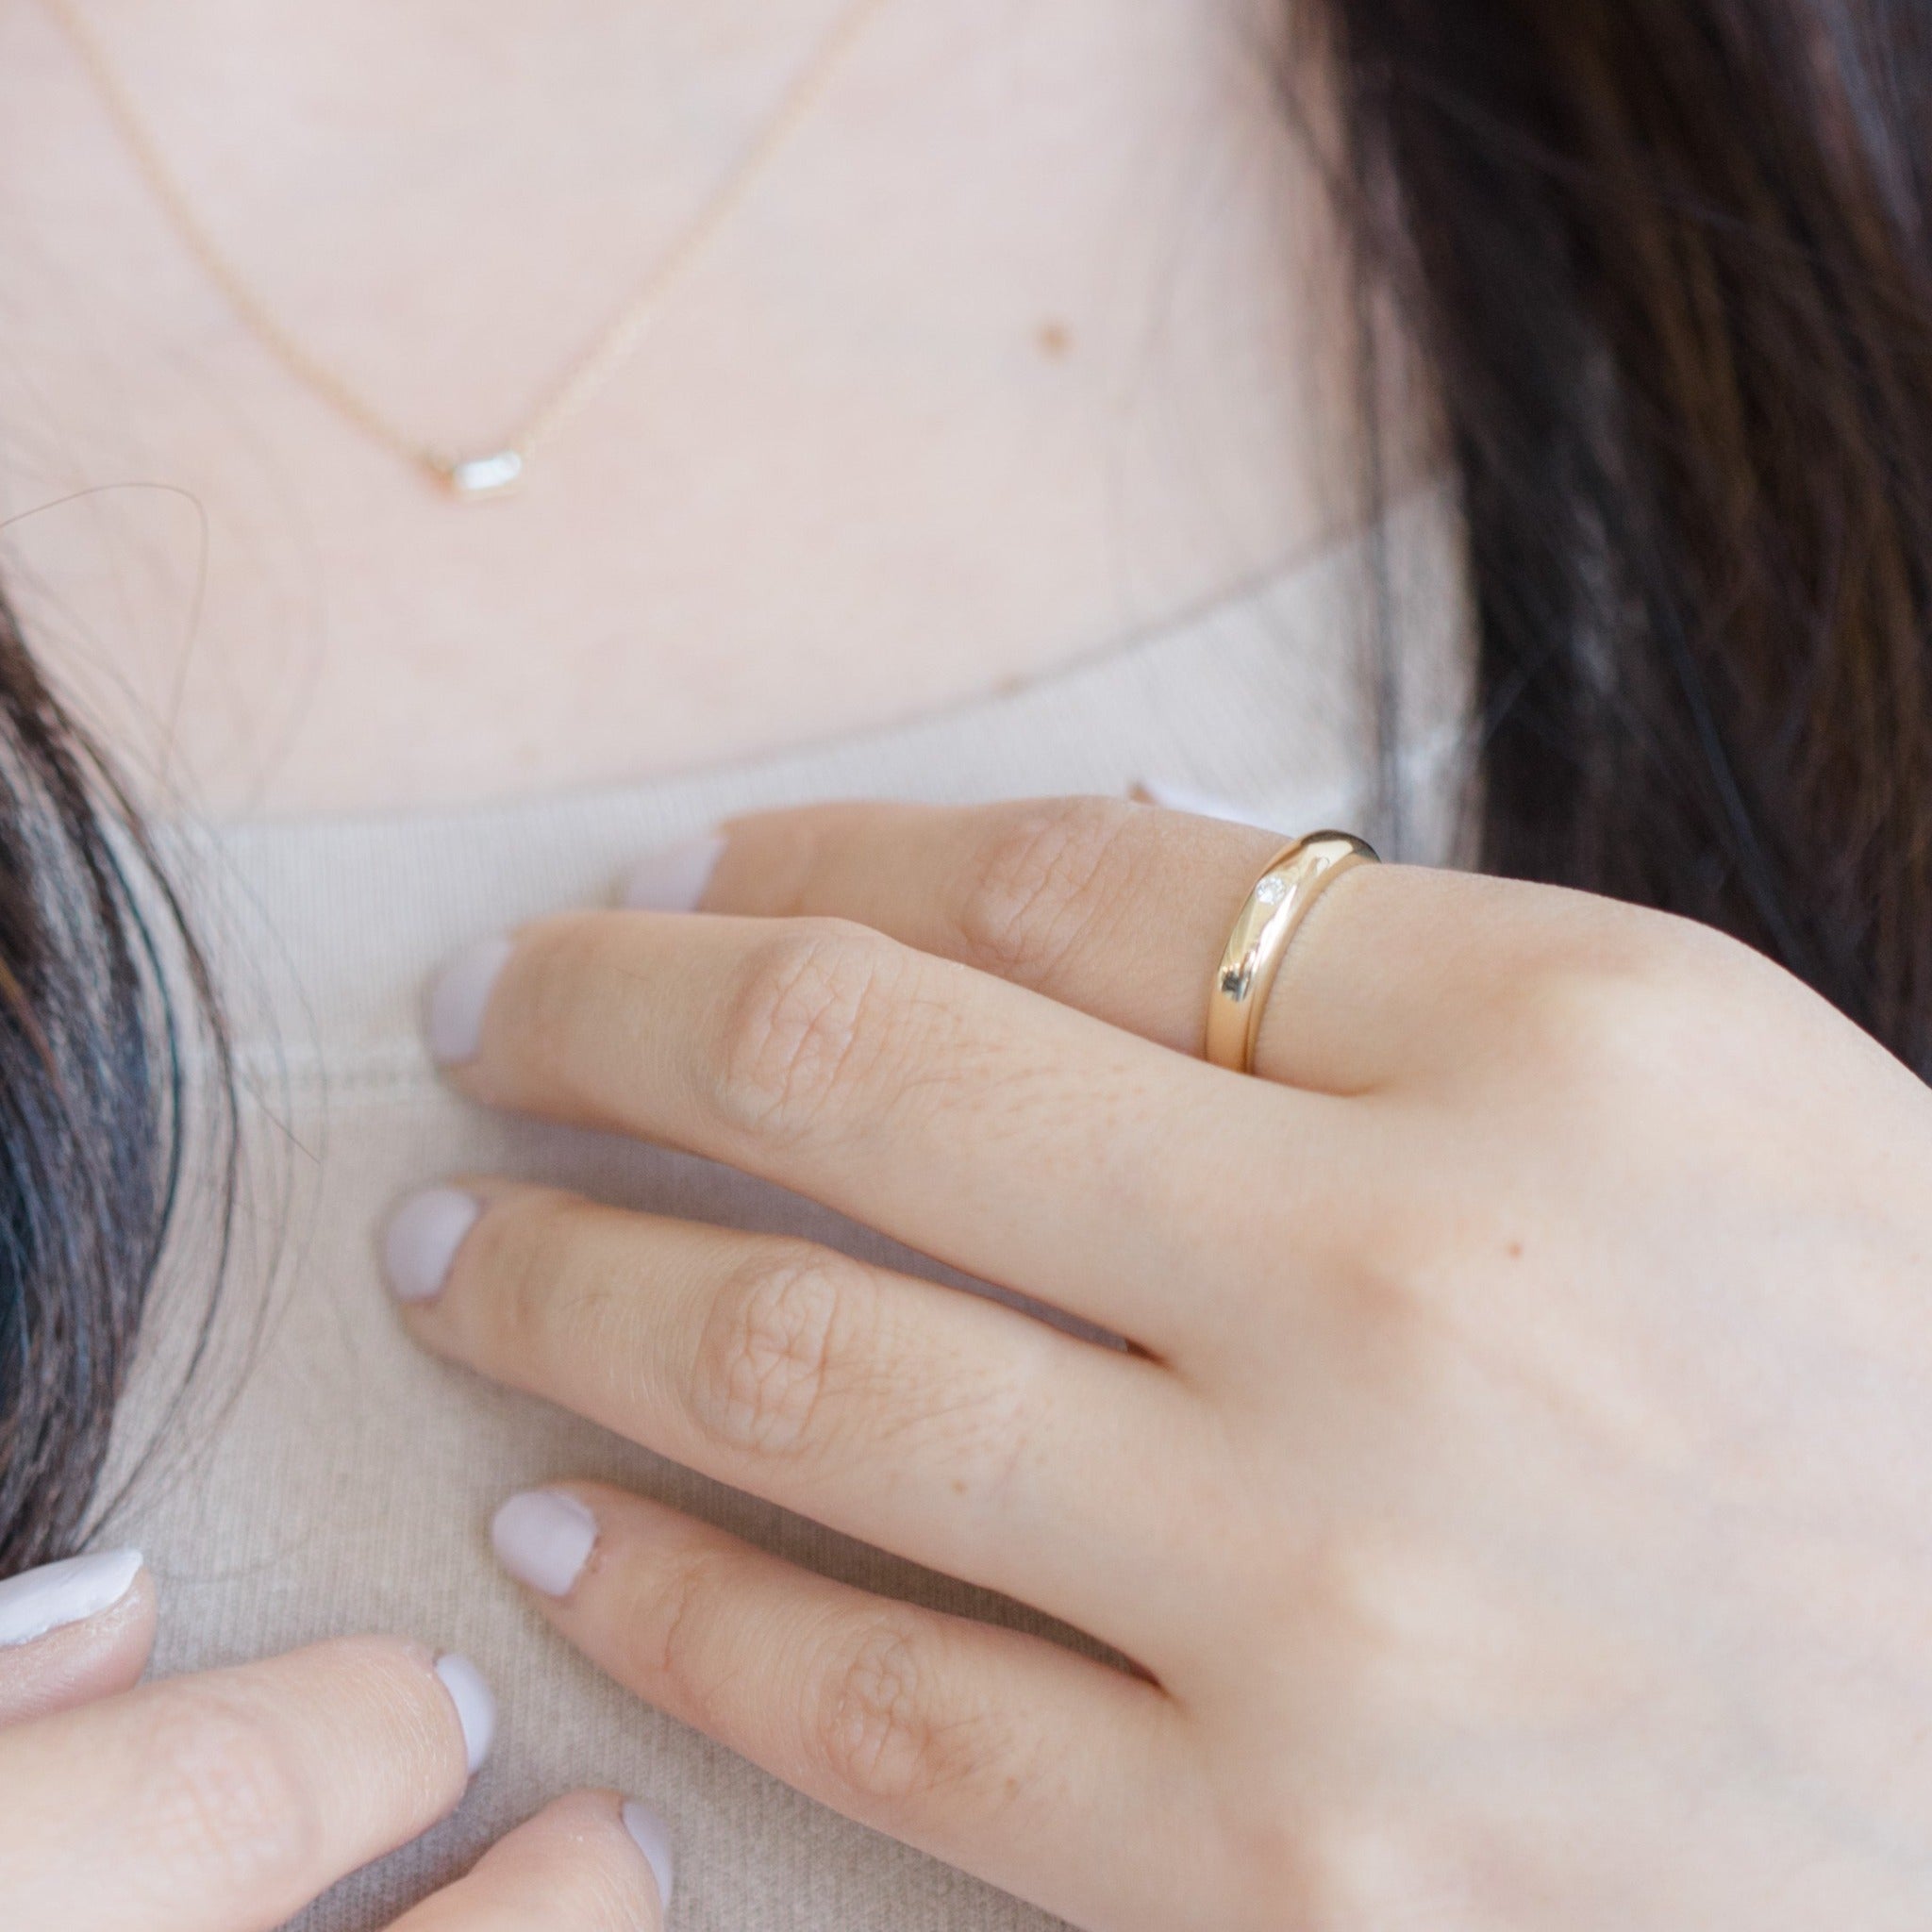 Model is wearing gold diamond dome ring on its own. The ring's surface is a shiny polished finish.